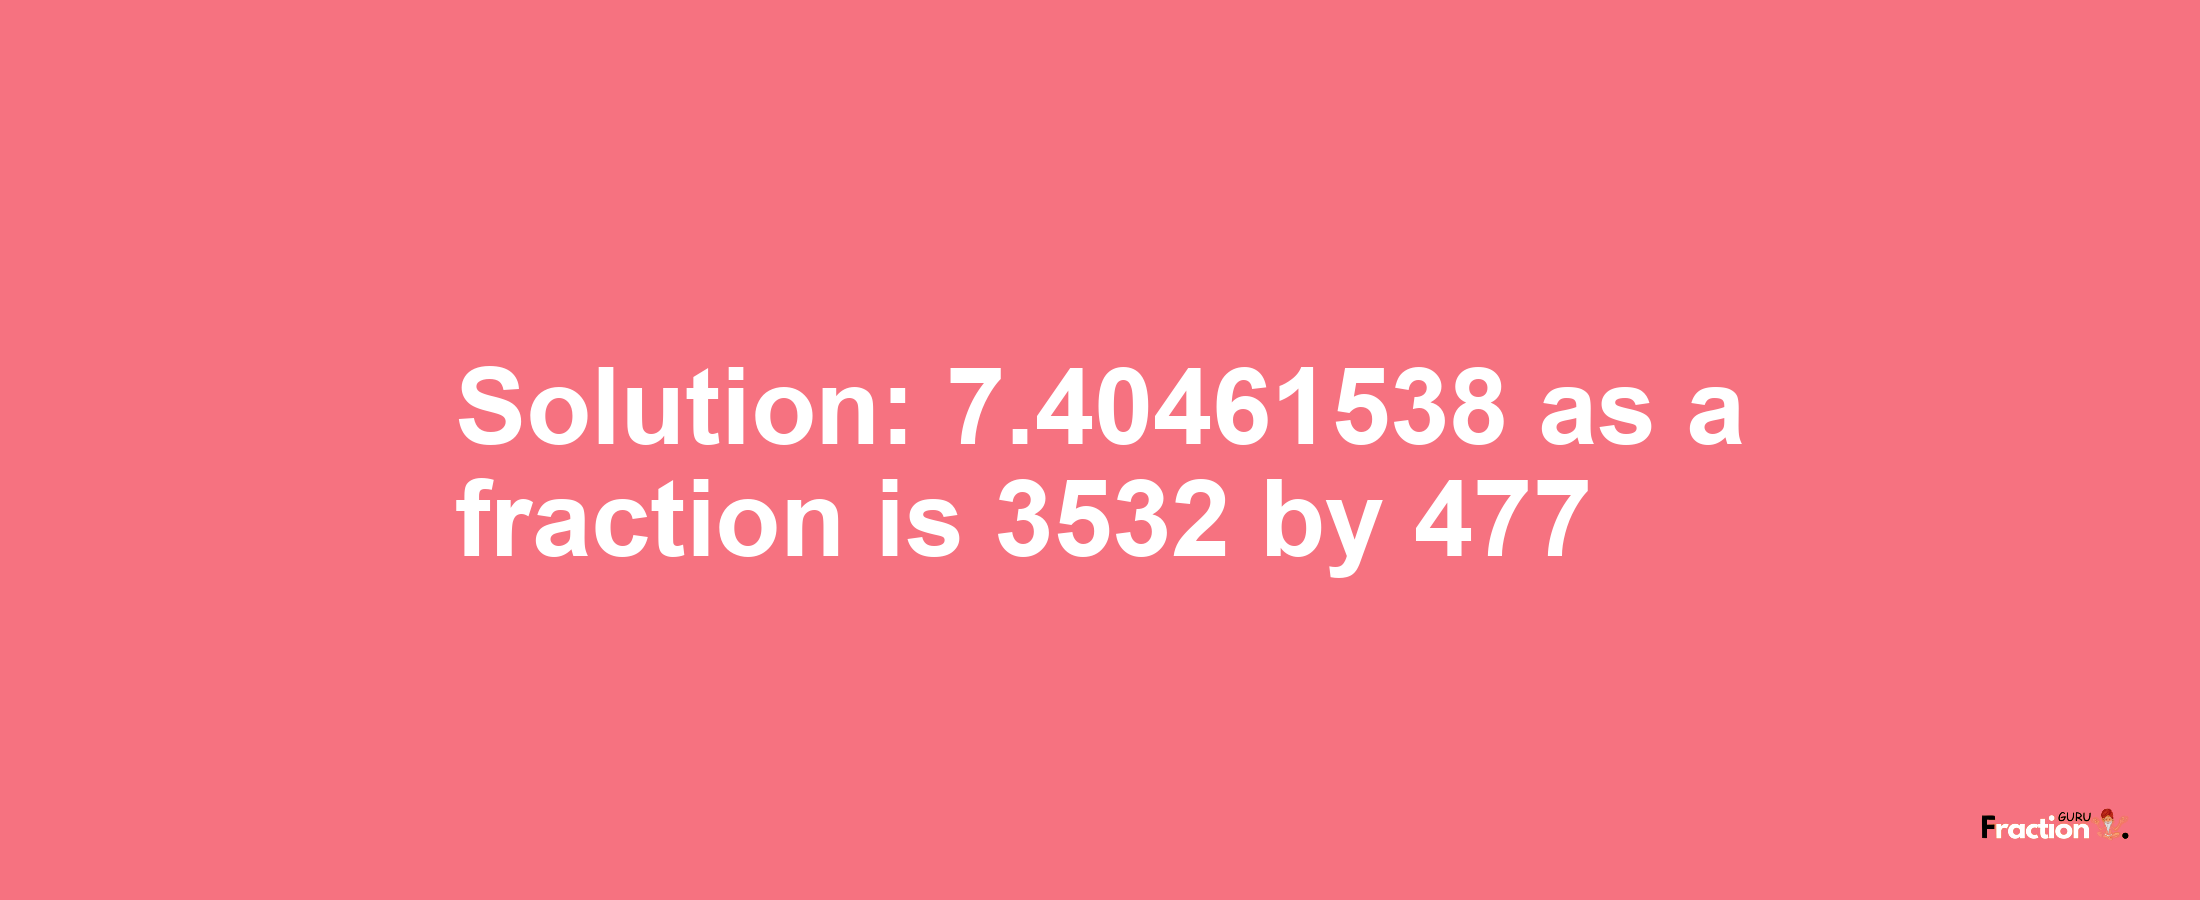 Solution:7.40461538 as a fraction is 3532/477